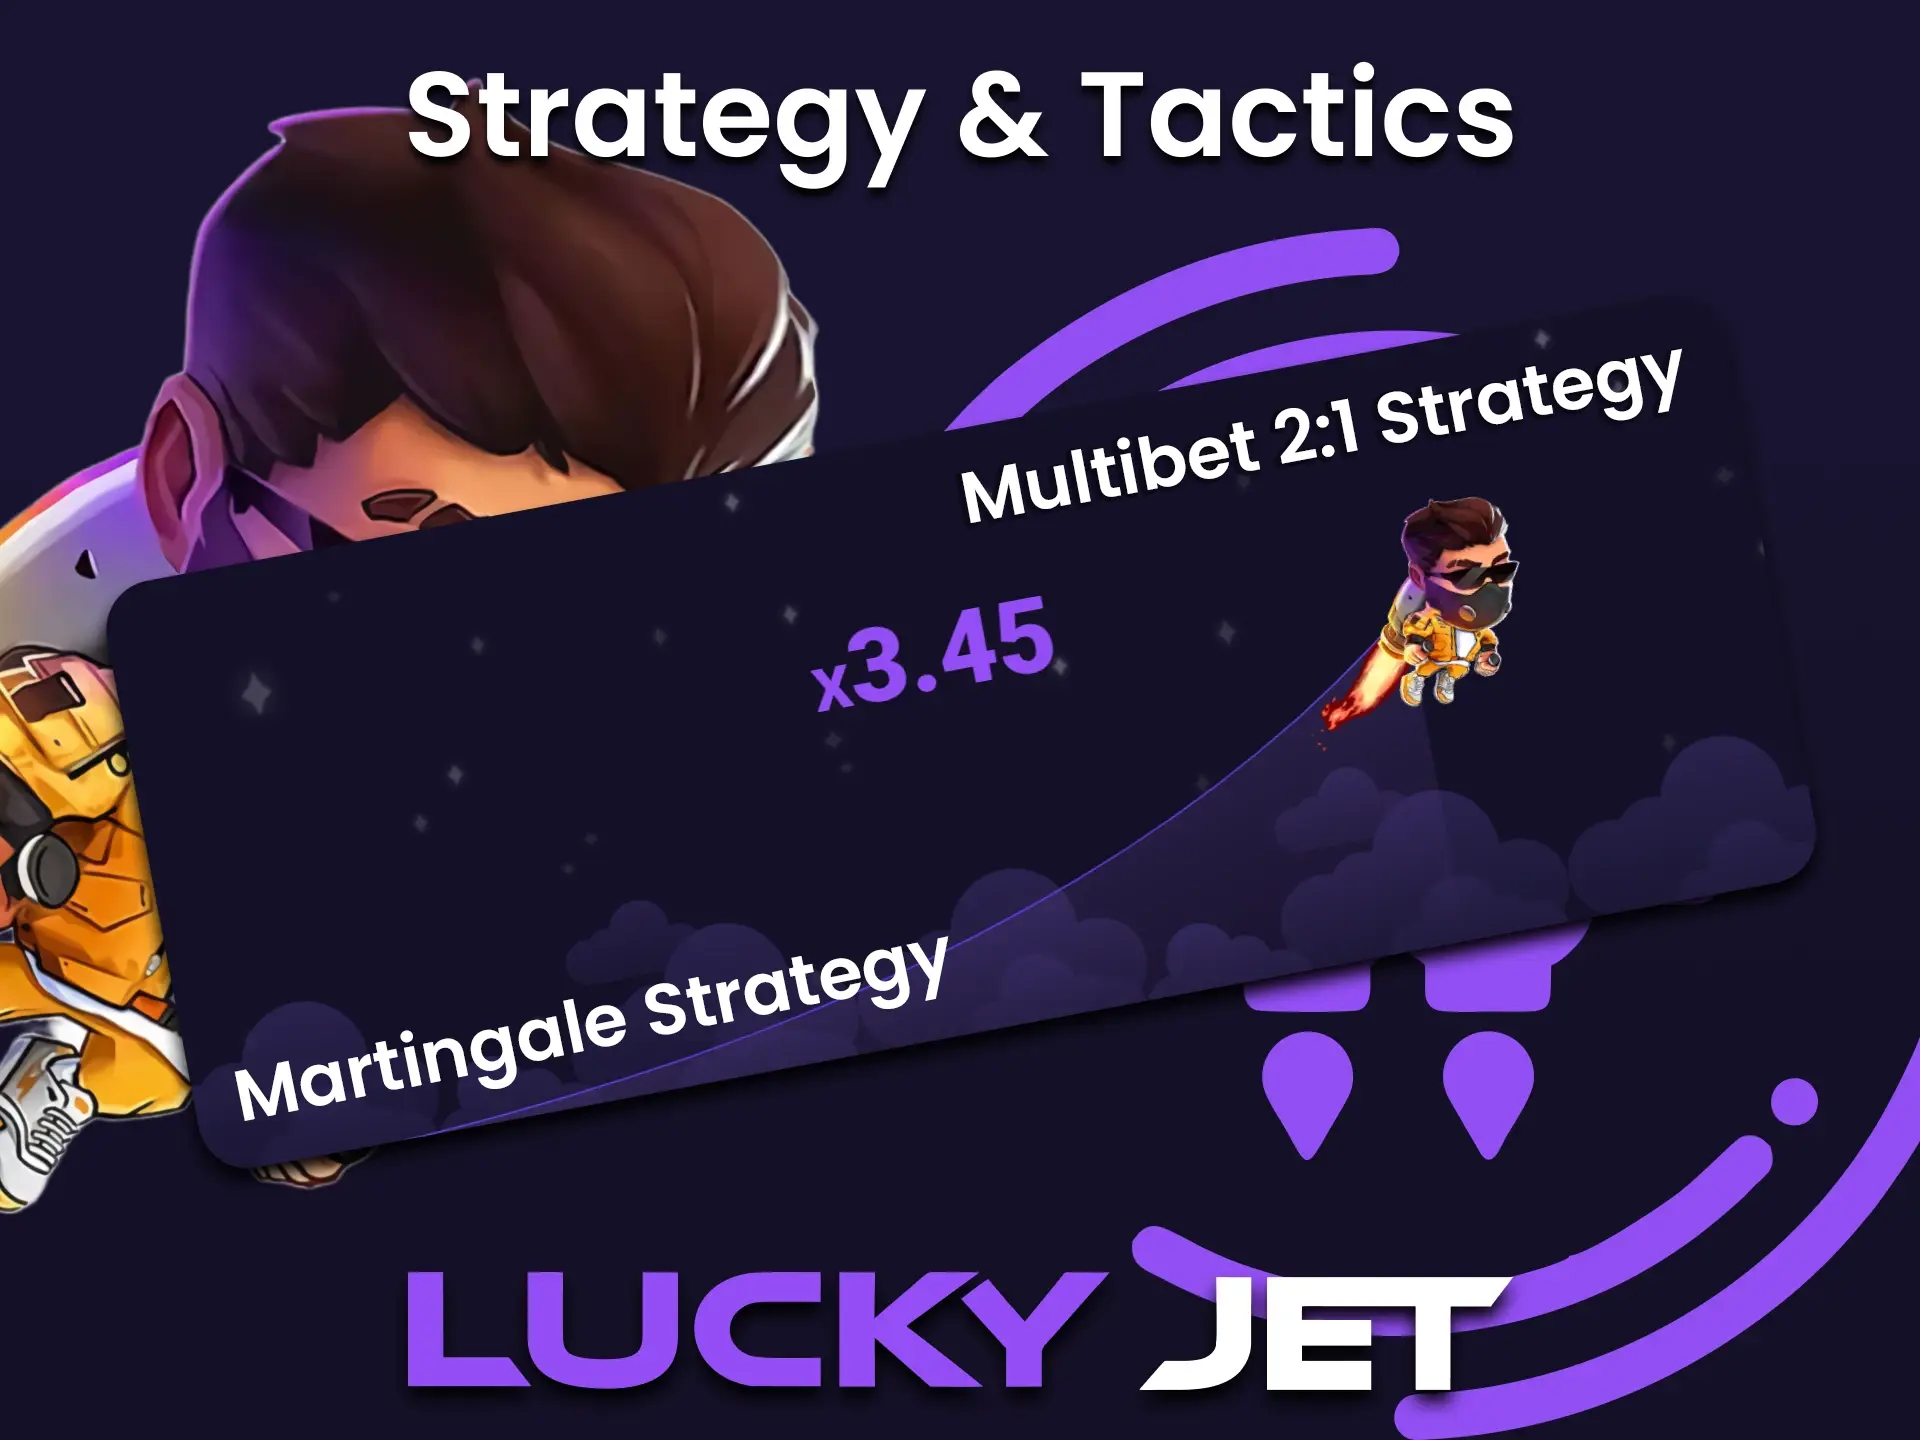 Use your full potential to win the Lucky Jet game.